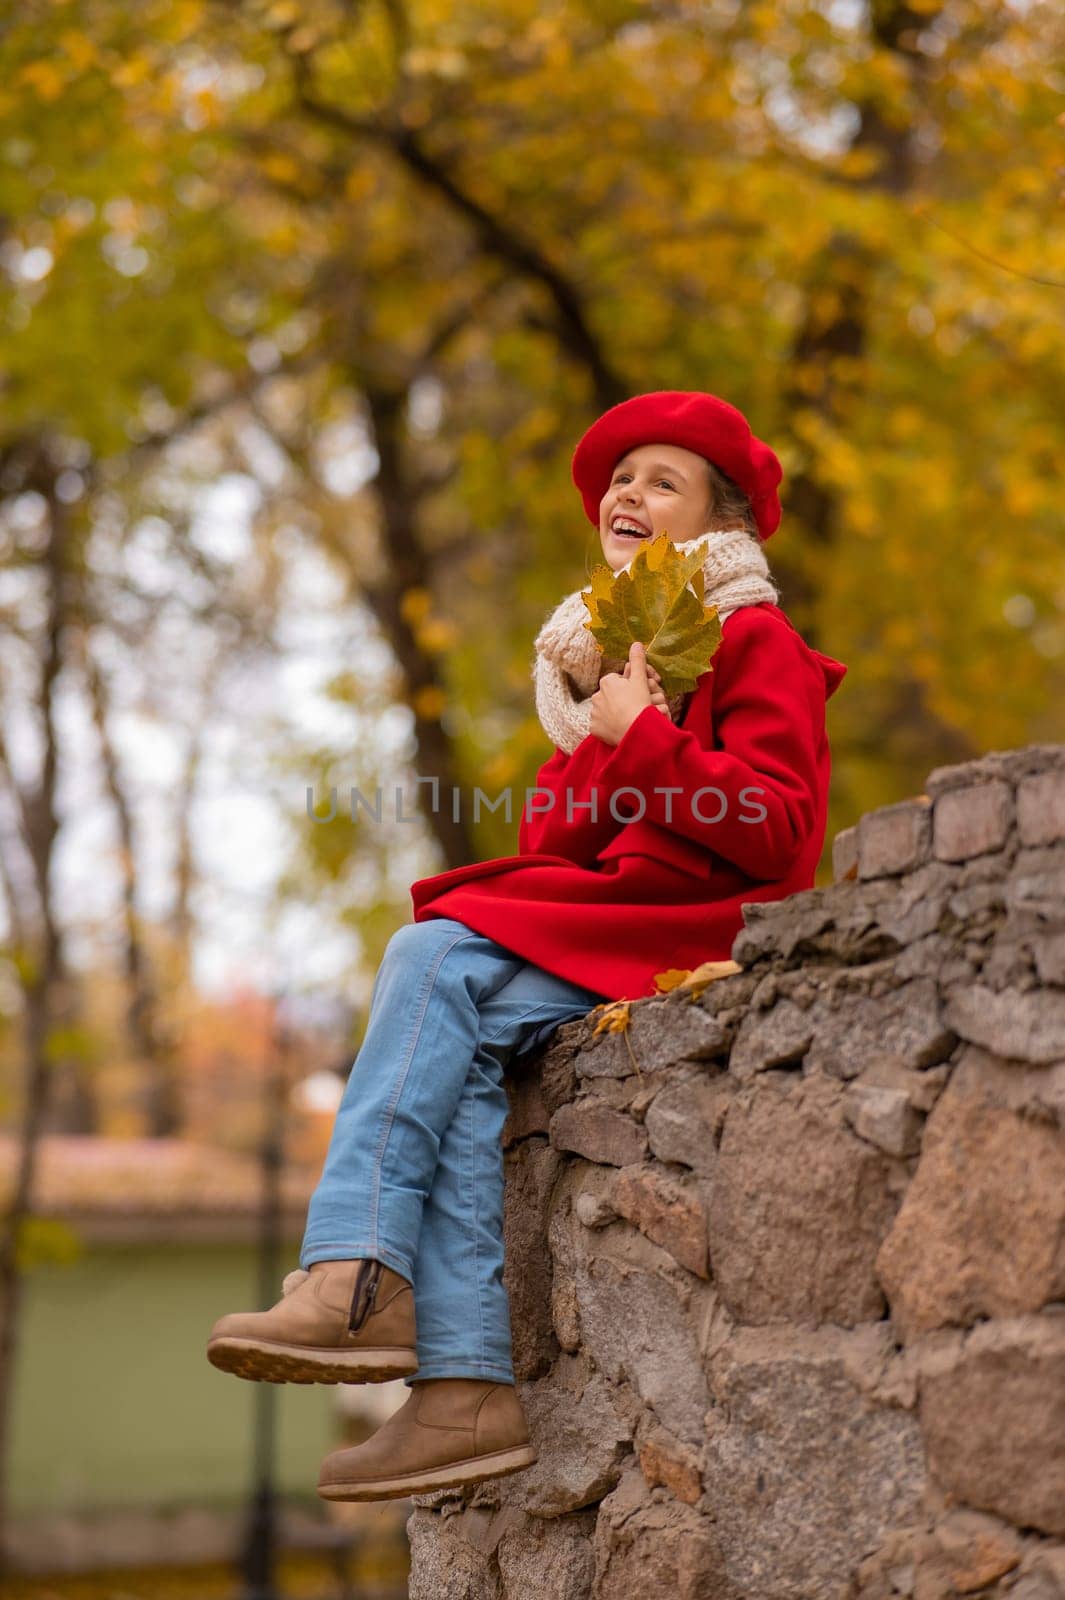 Smiling caucasian girl in a red coat and beret sits on a brick wall on a walk in autumn